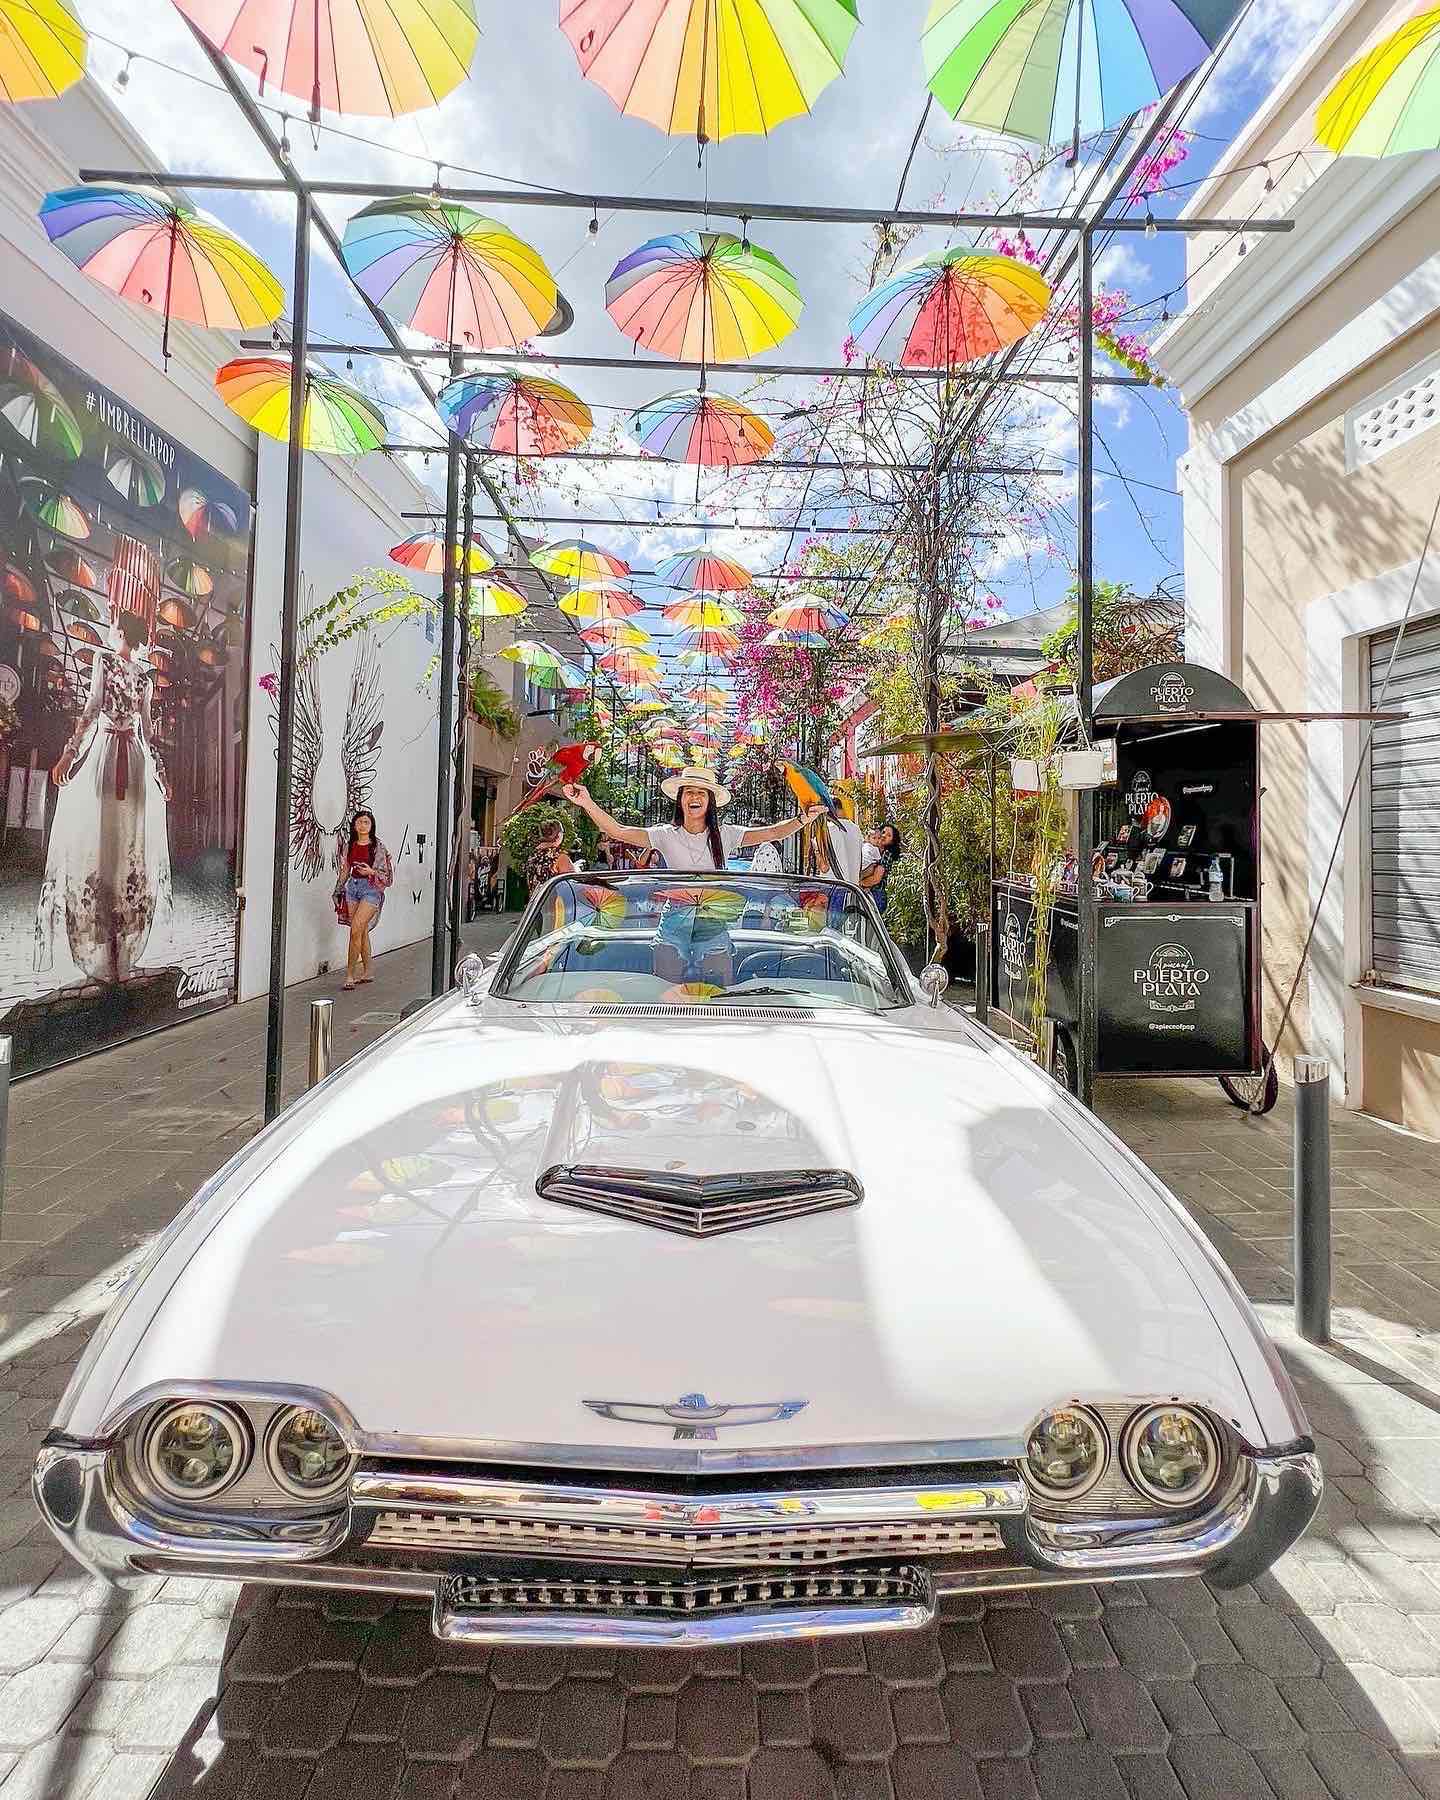 Puerto Plata classic cars in the historic district